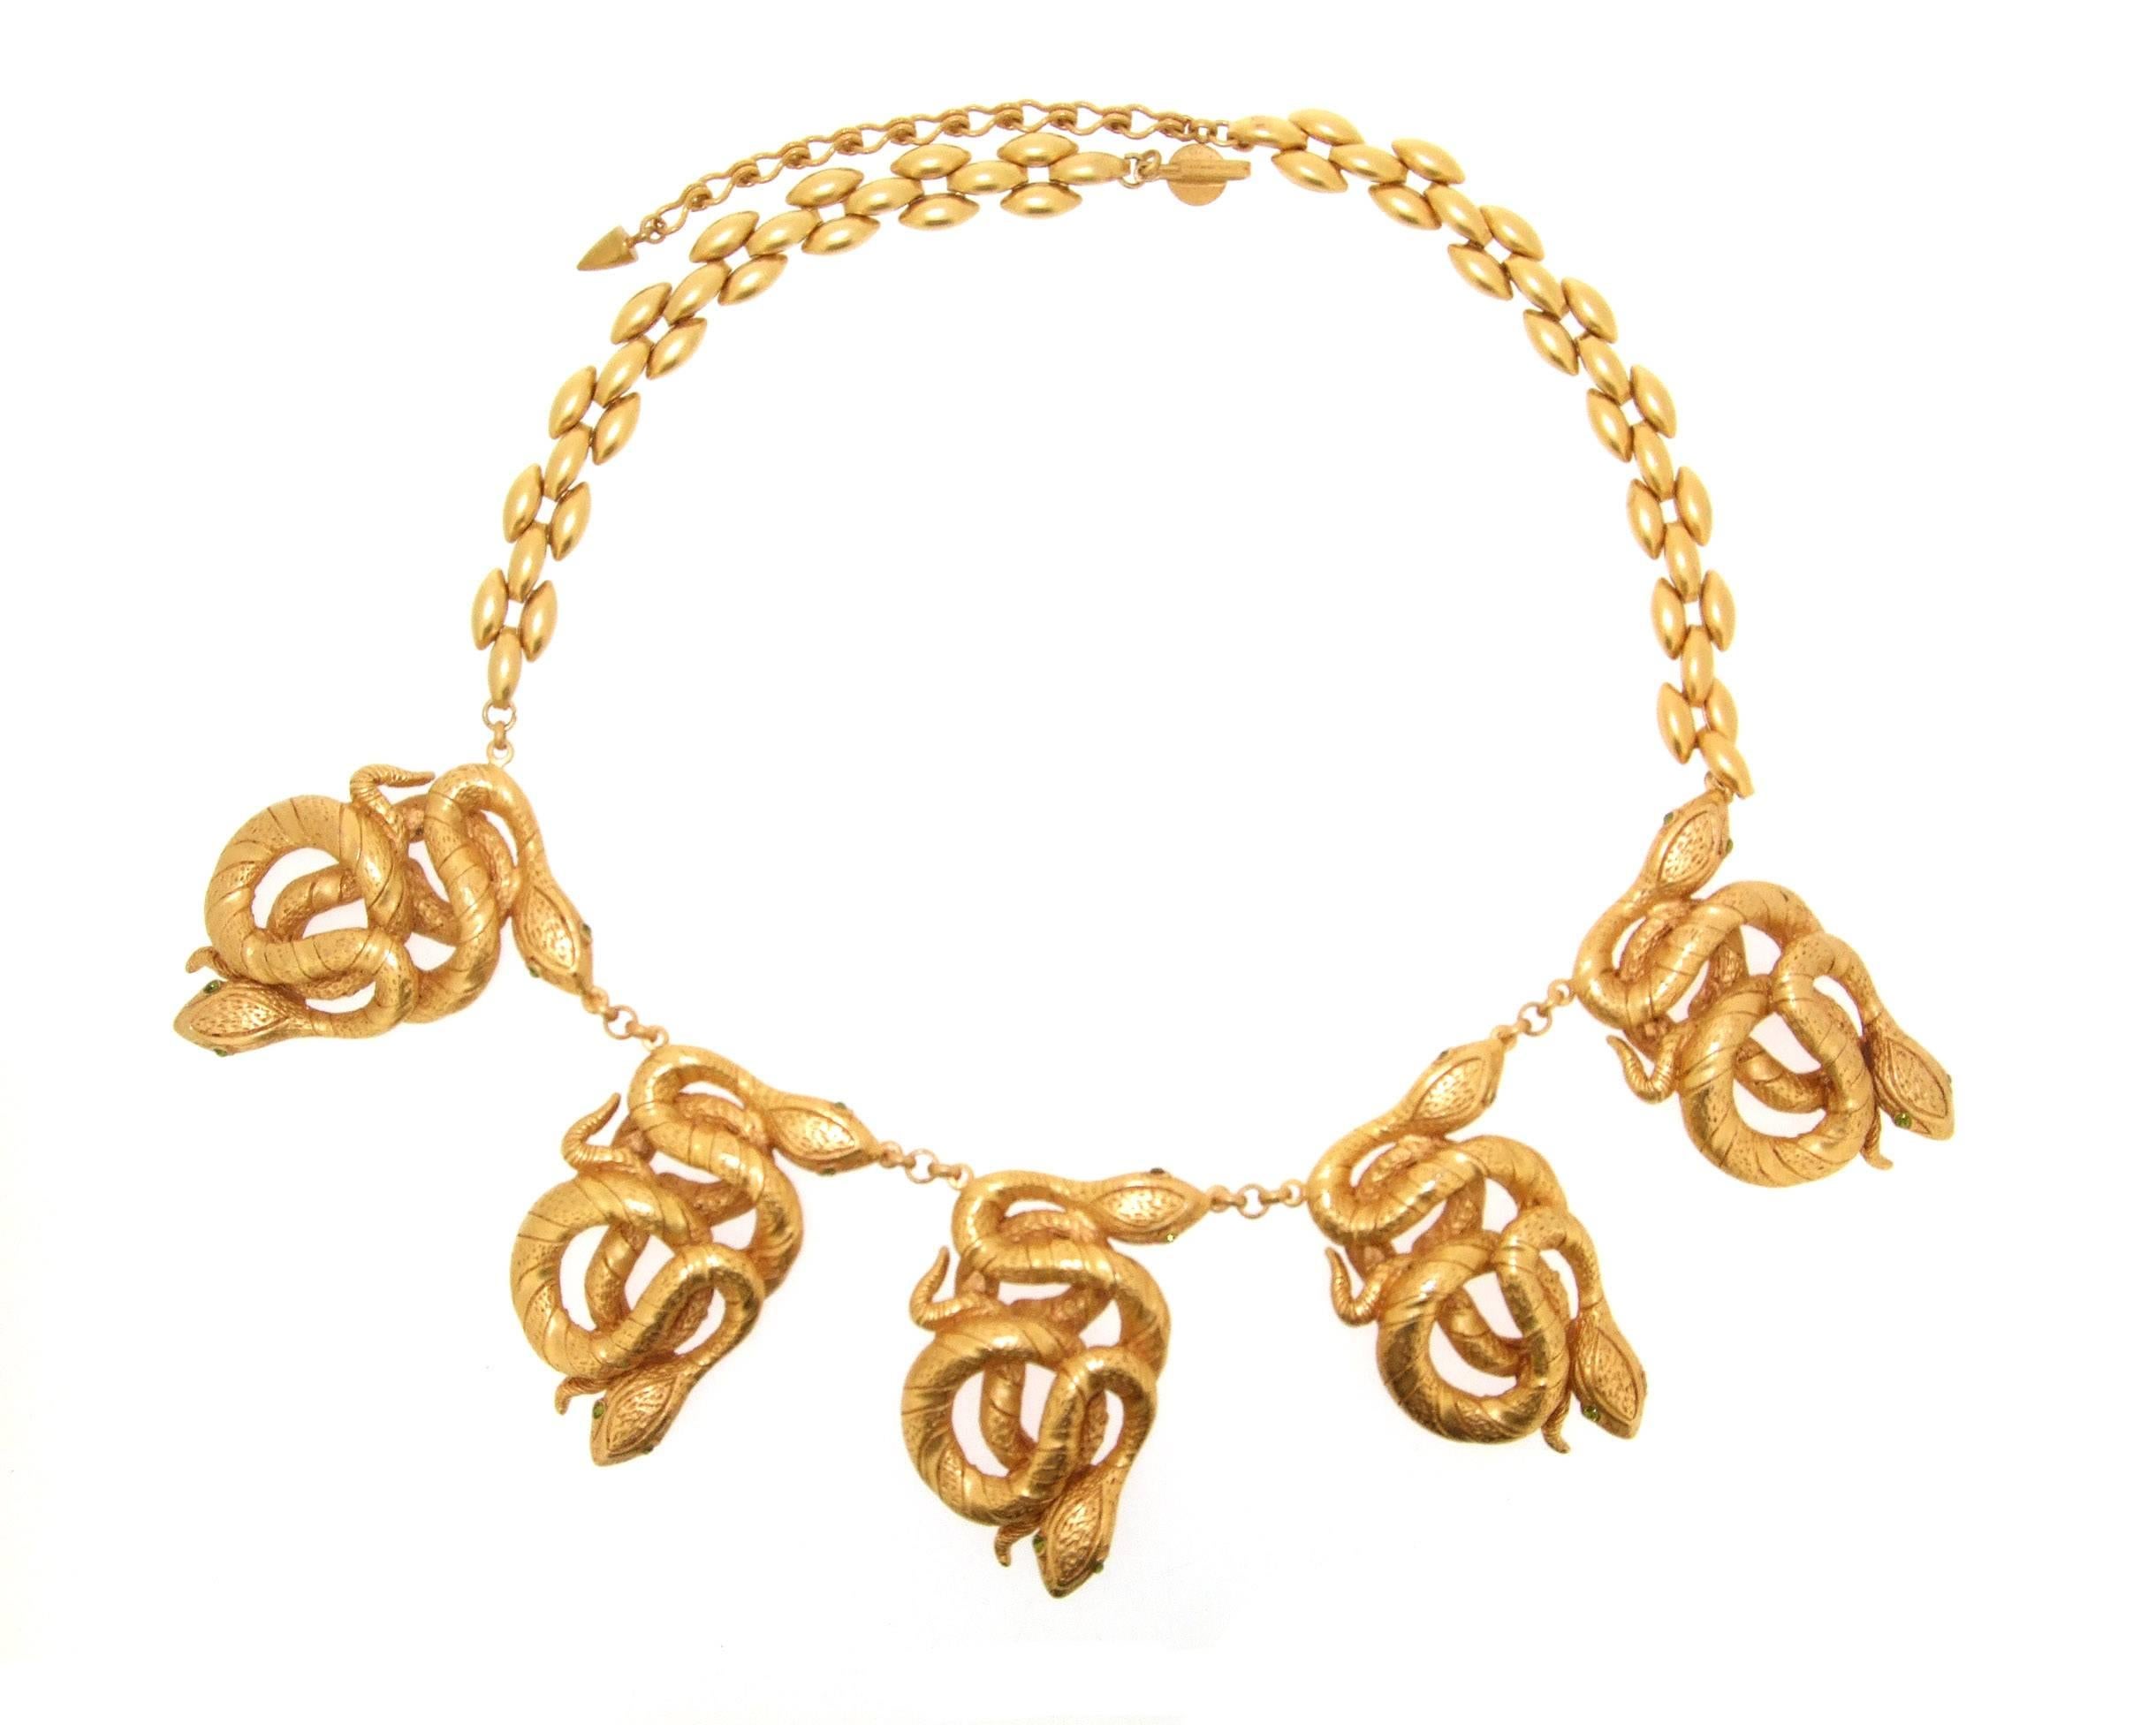 A statement necklace by Askew London featuring serpent pendants in gold plated metal set with crystal eyes.

It can be worn between 16-18 inches in length as it has an adjustable catch and chain. Each snake pendant is 3cm by 5cm wide.